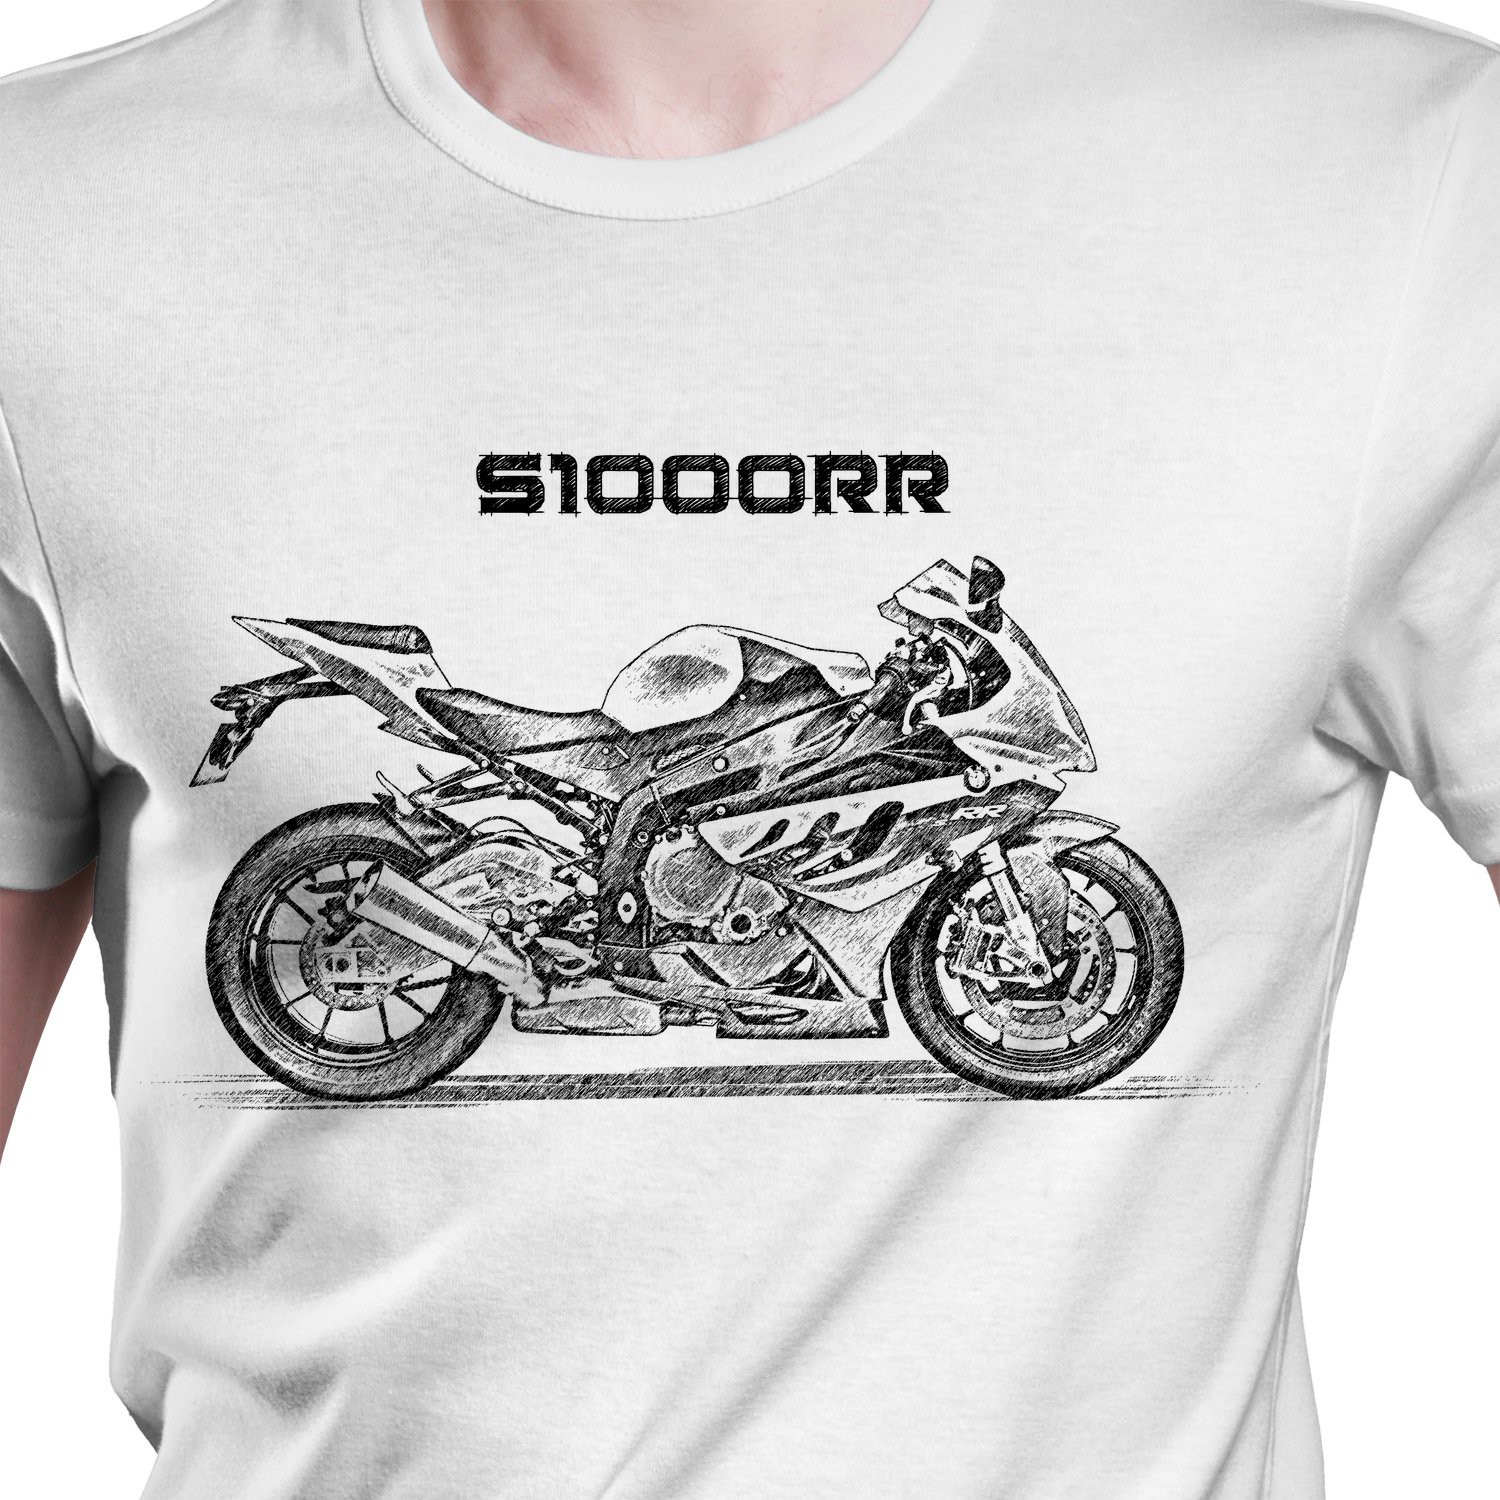 White T-shirt with BMW S1000RR. Gift for motorcyclist.